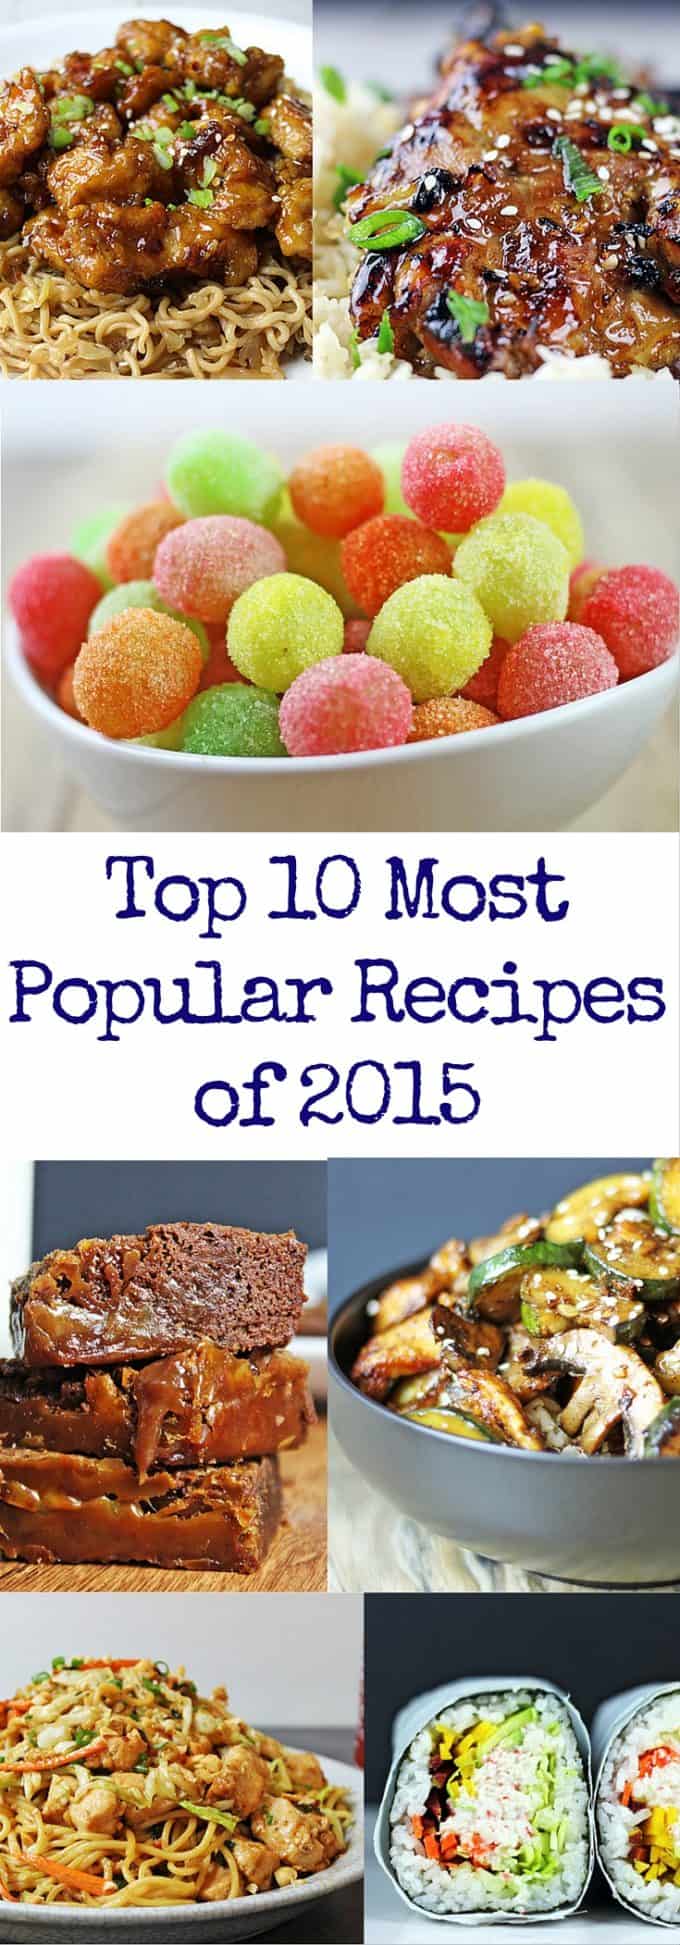 Top 10 Most Popular Recipes of 2015 with a couple desserts a fair amount of copycat recipes and lots of 5 ingredient meals! | dev.dinnerthendessert.com